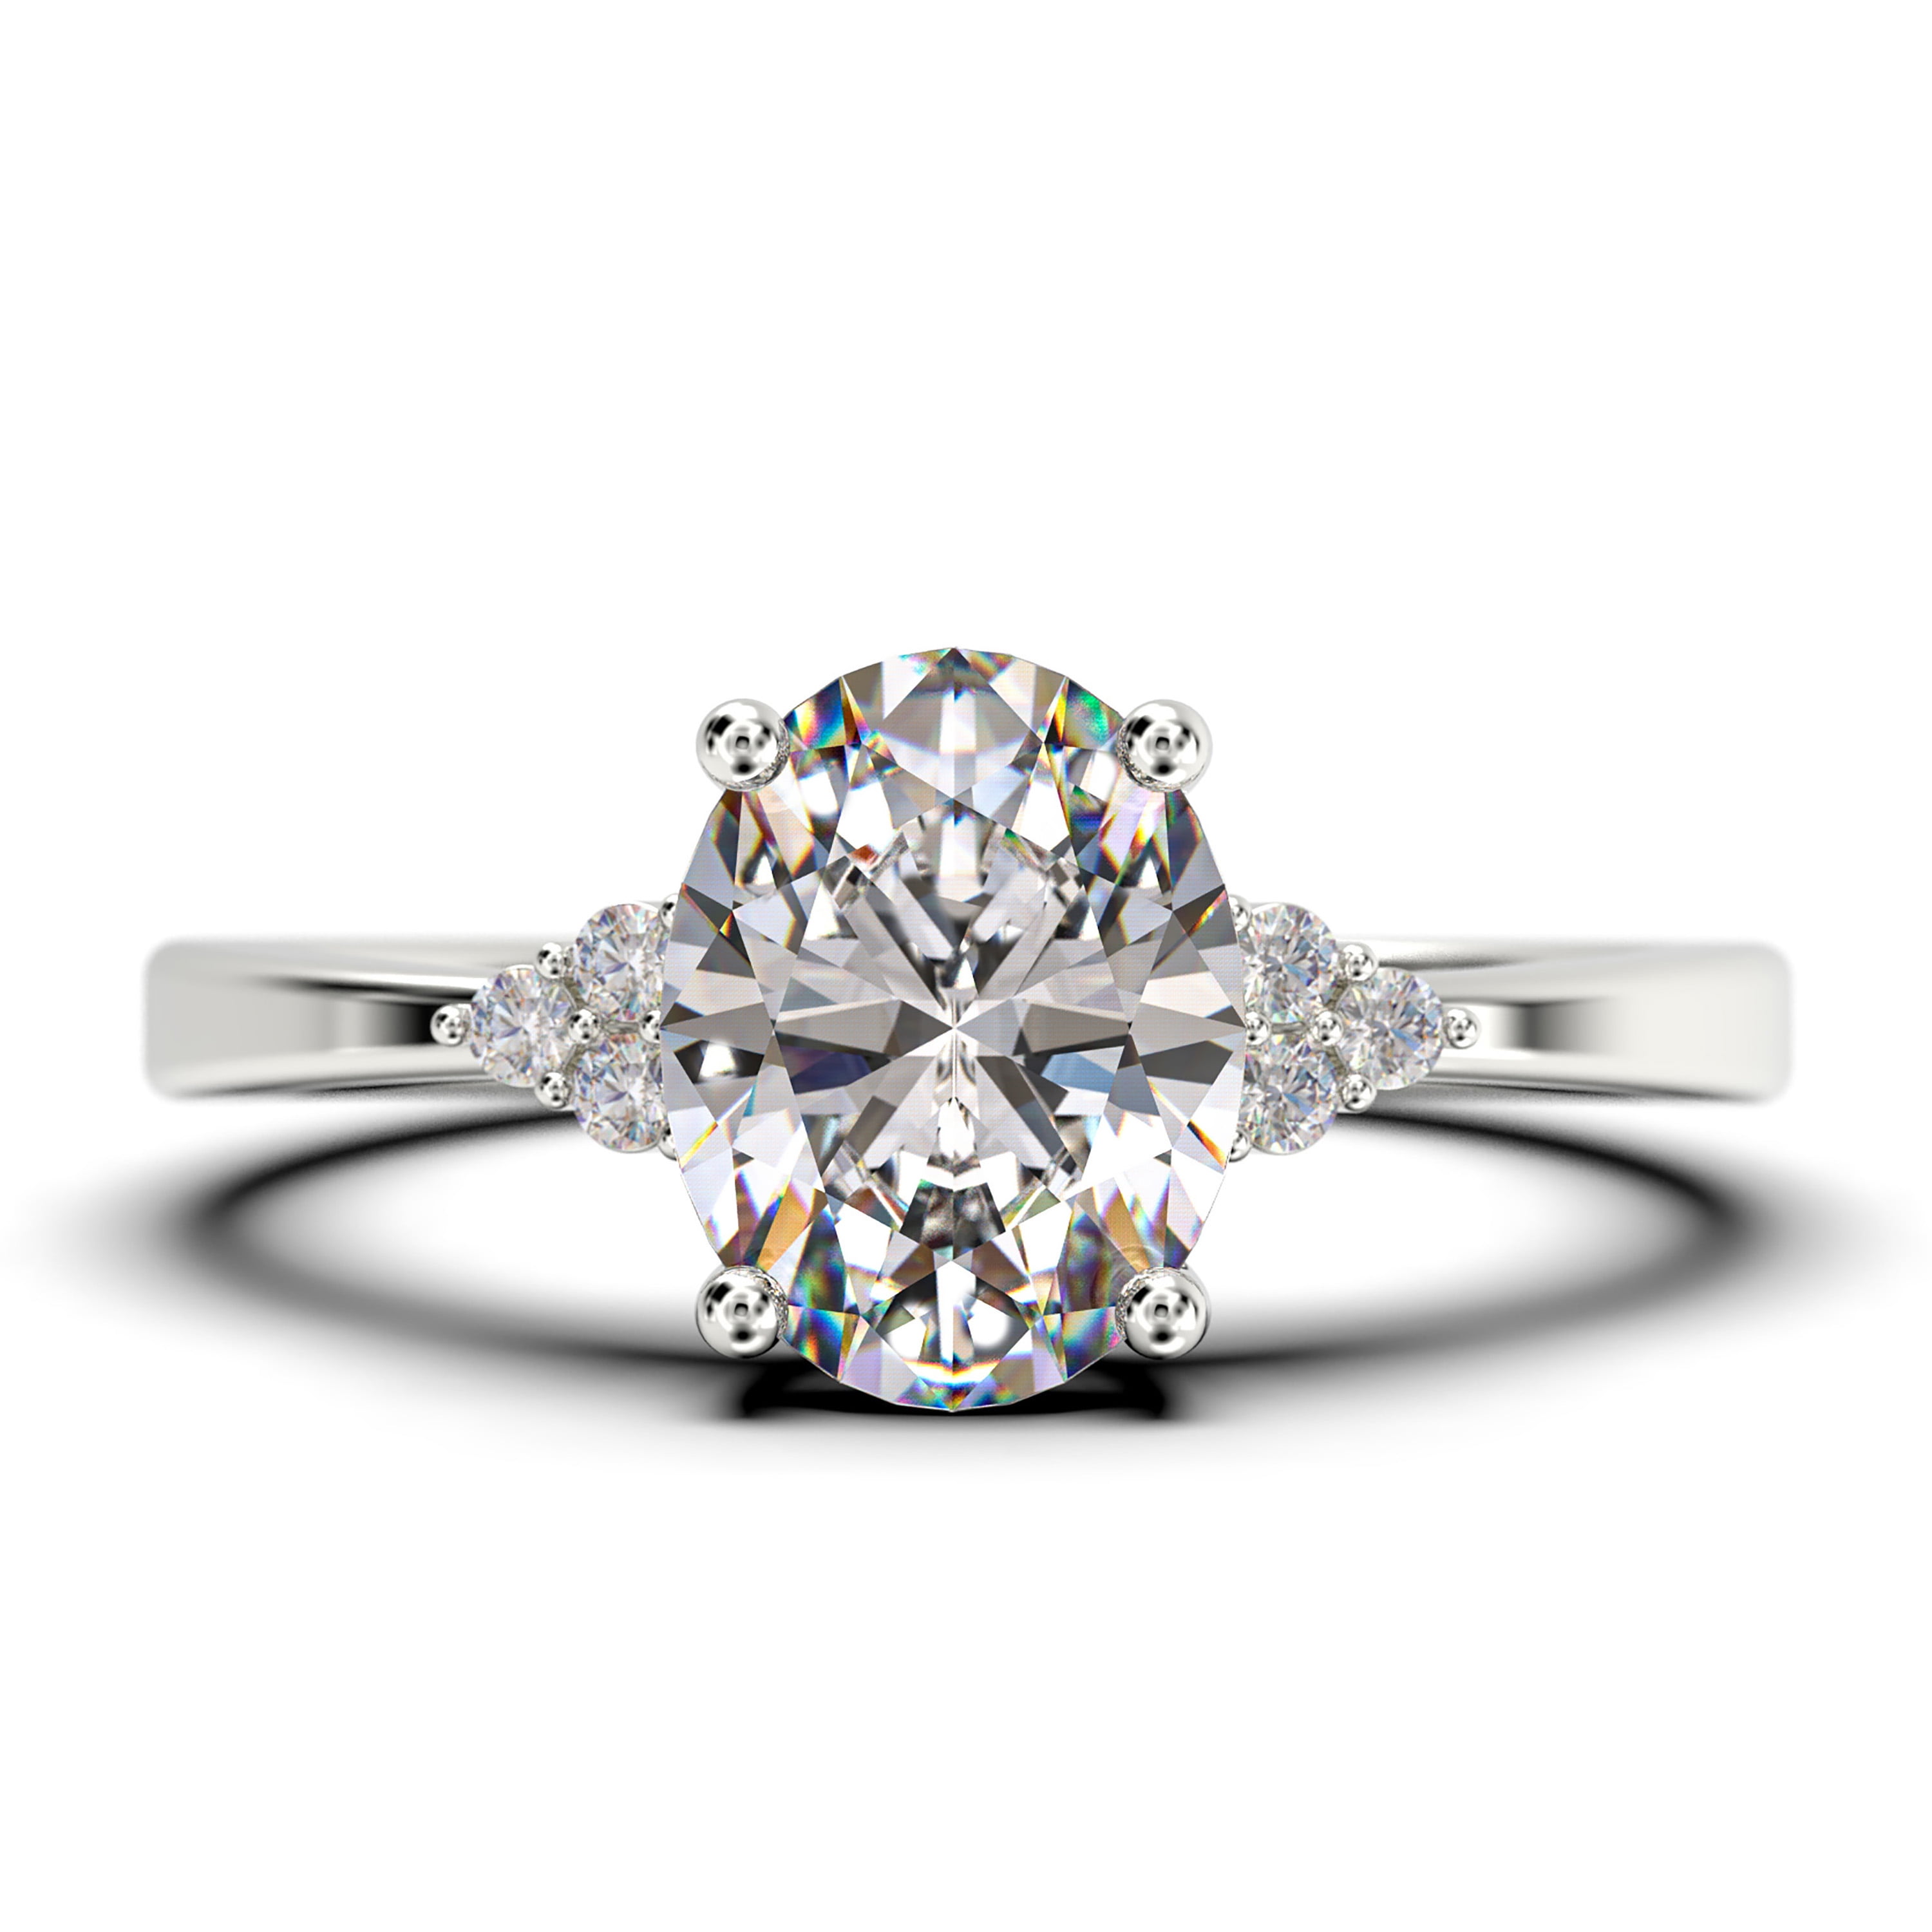 Lab Created Diamond Diamond Ring 1.50 Ct Oval Cut White Diamond & Moissanite 10K Engagement Ring. 14K White Gold And Sterling Silver